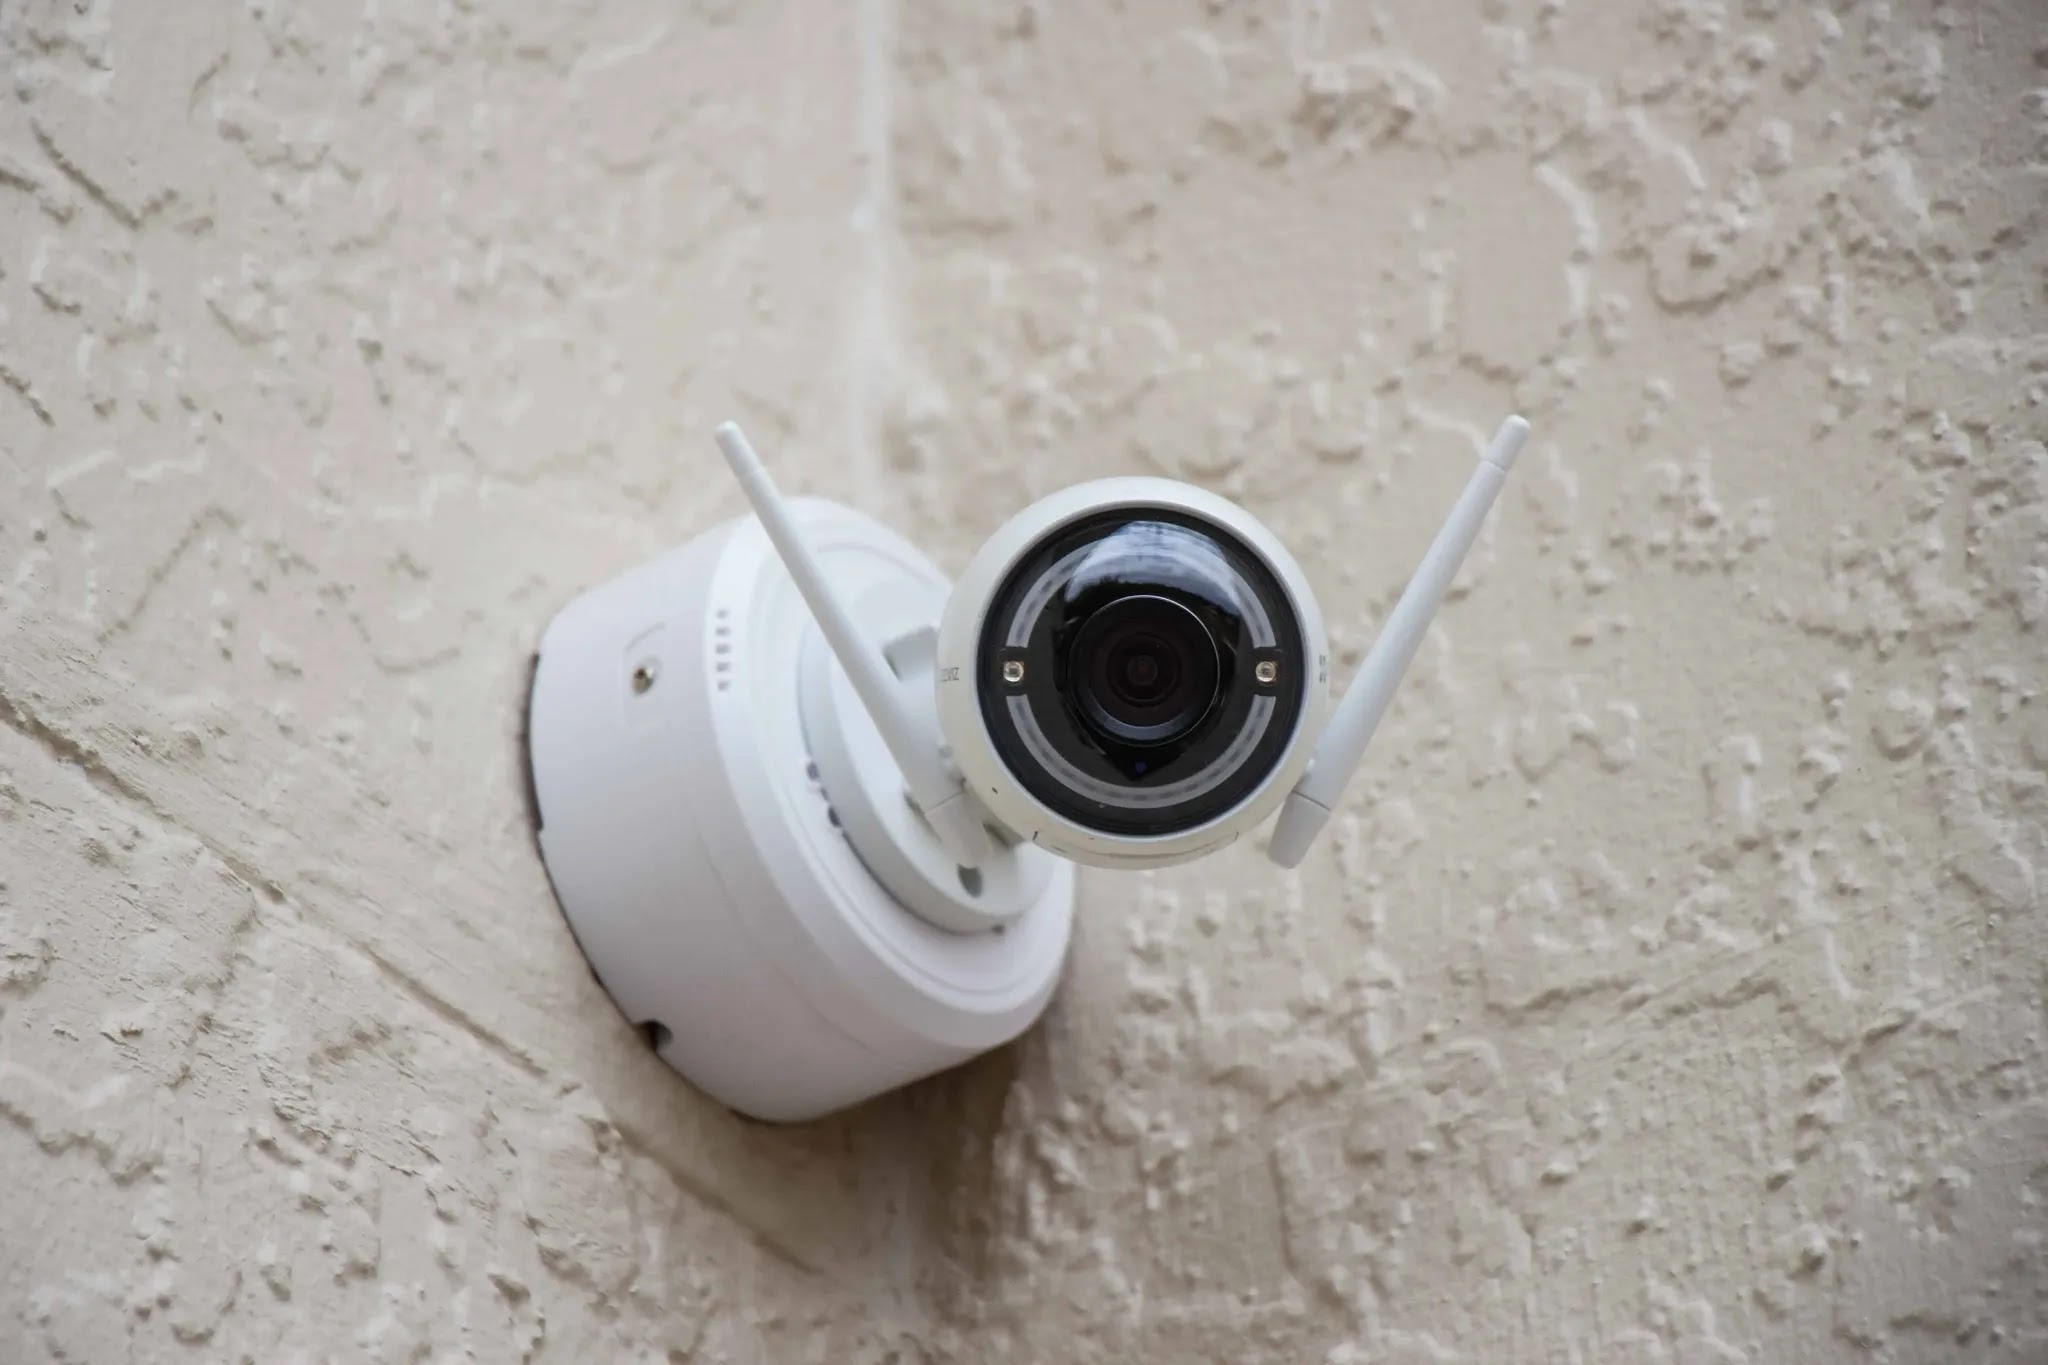 DIY Home security systems with cameras